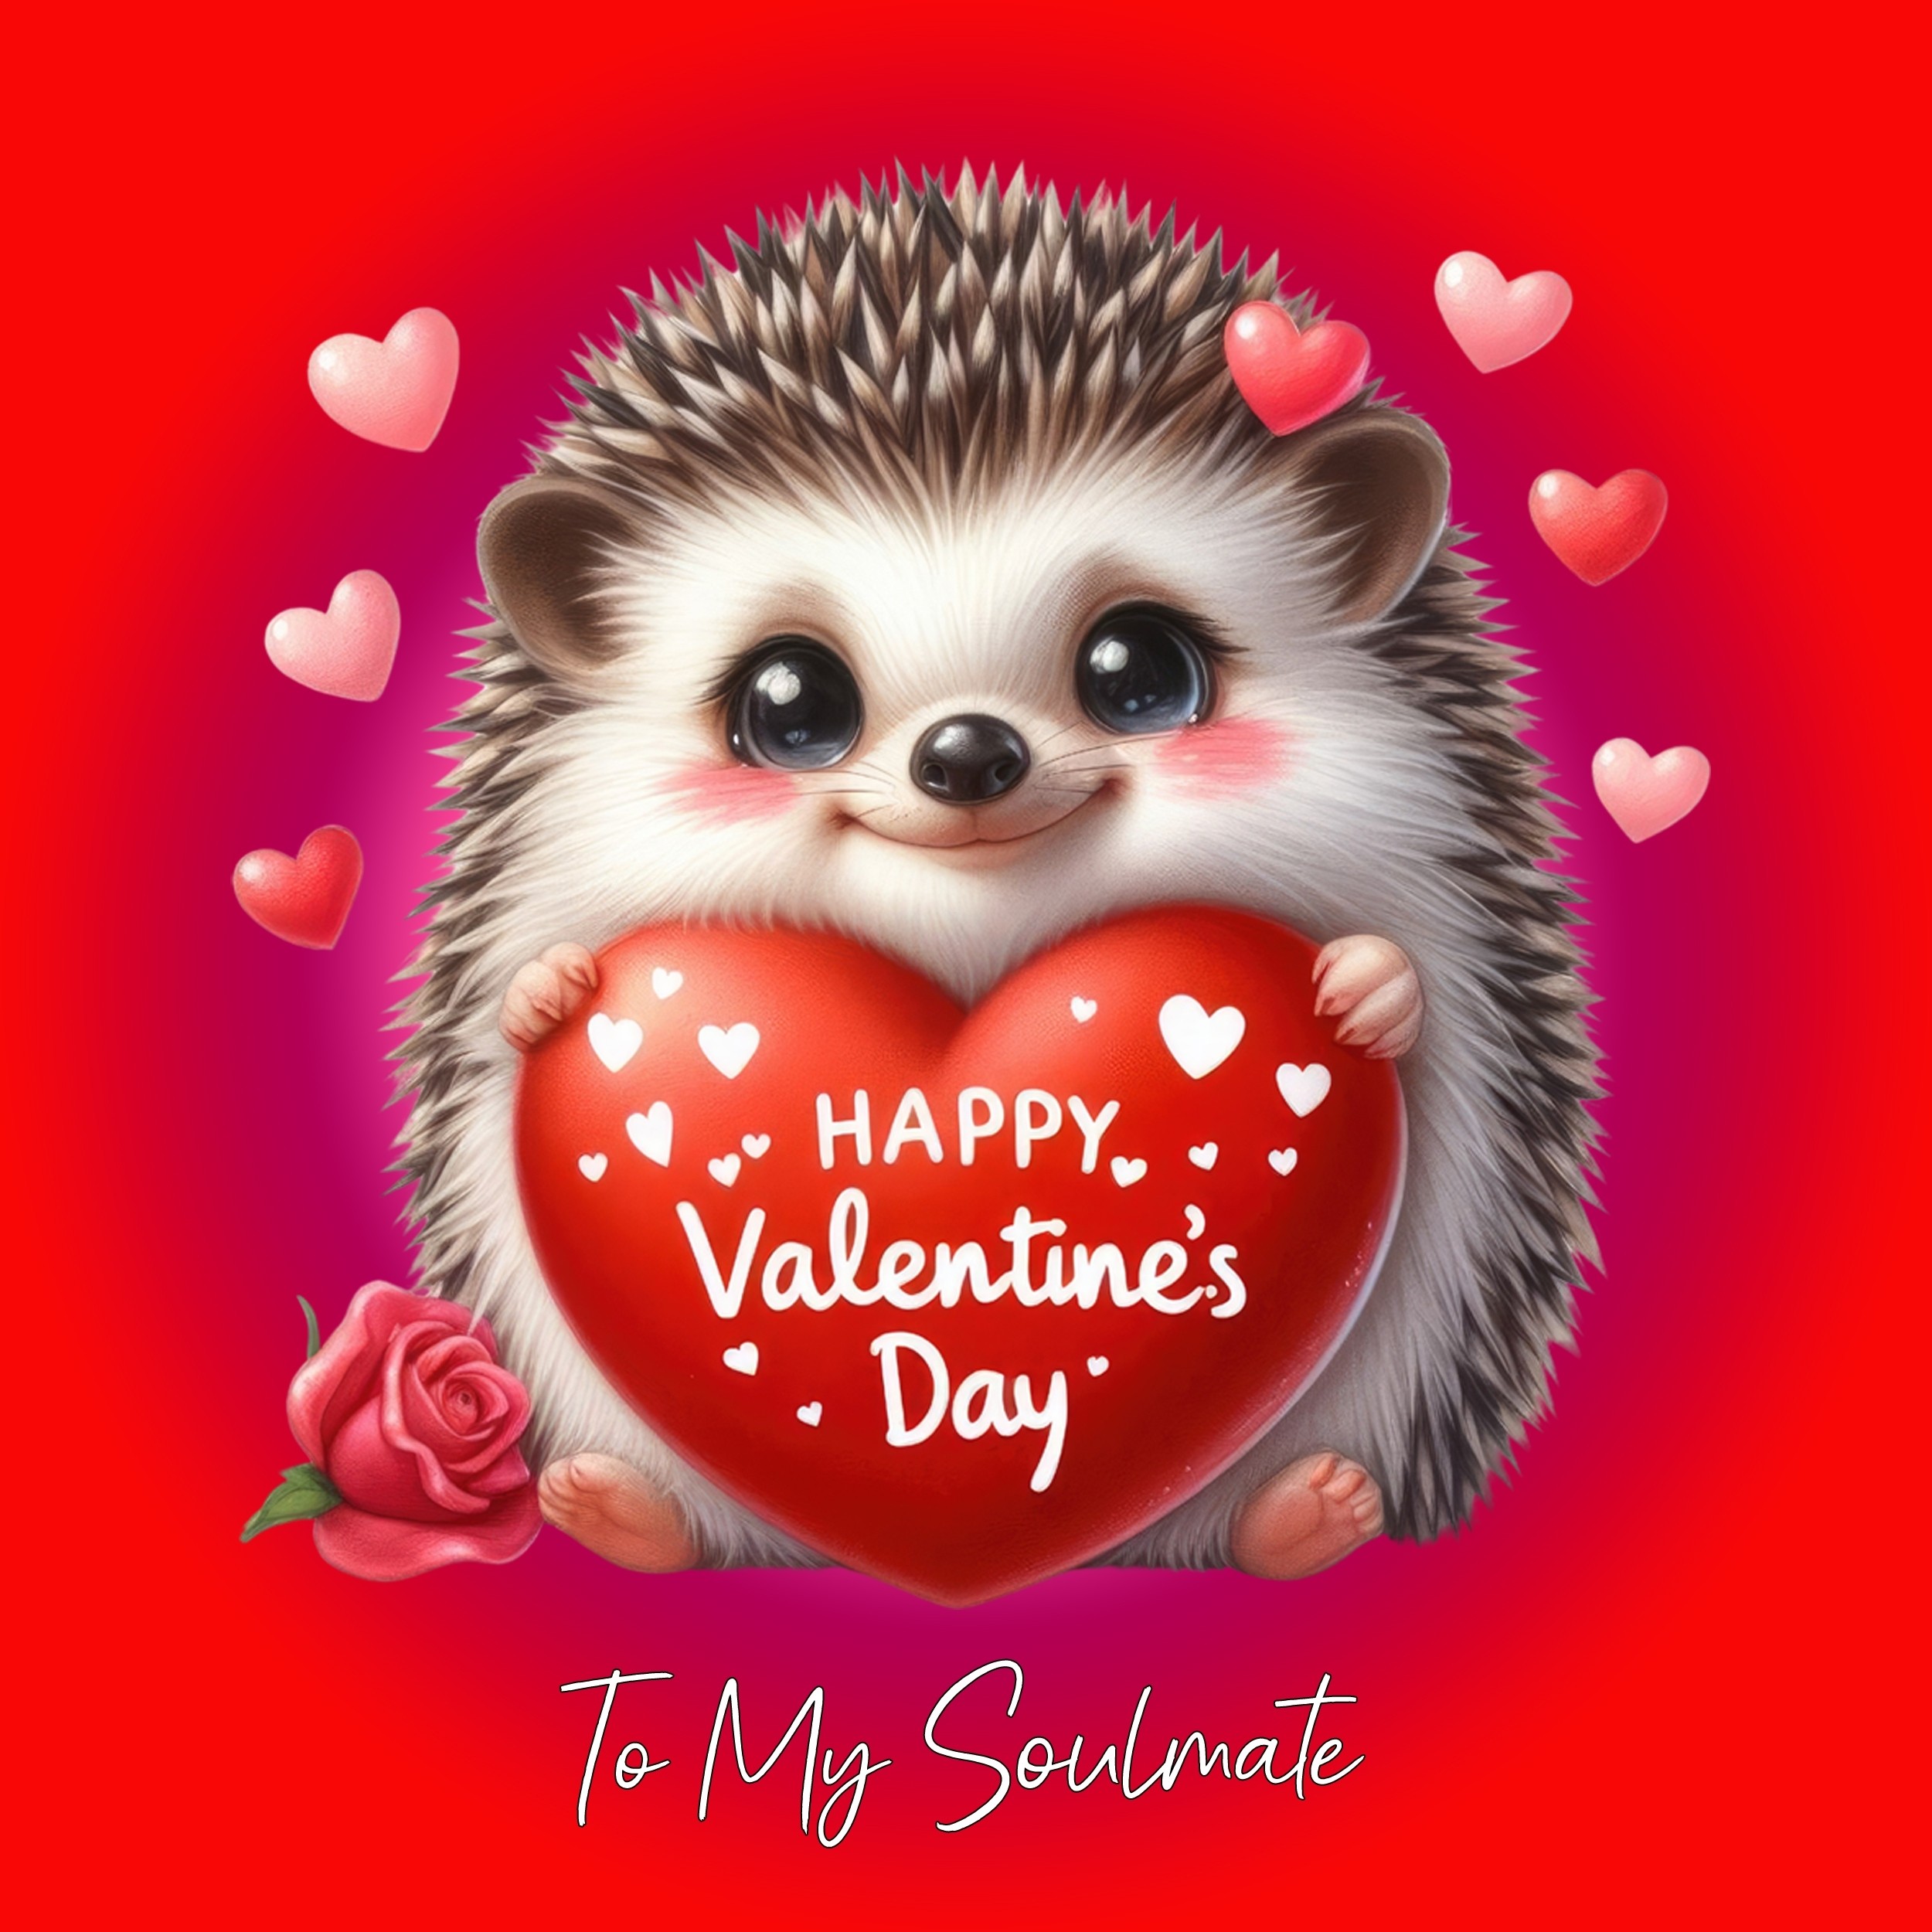 Valentines Day Square Card for Soulmate (Hedgehog)